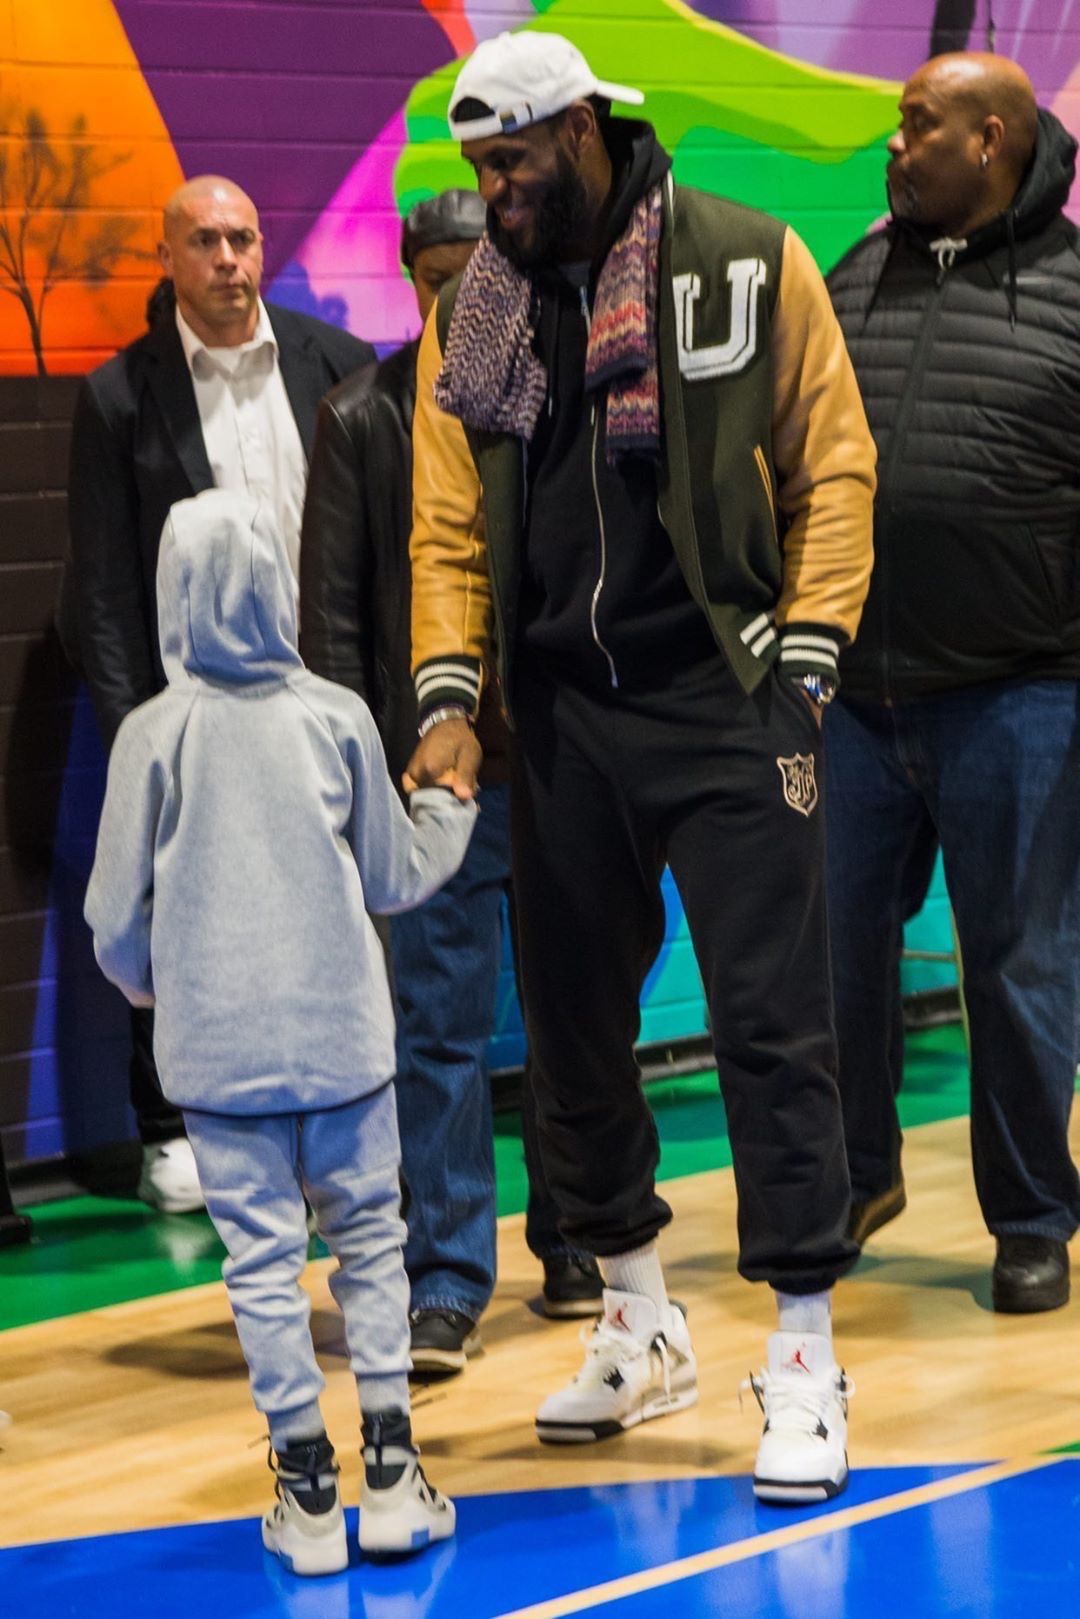 LeBron James Steps Out in Very Tight Sweatpants: Photo 3603253, LeBron  James Photos